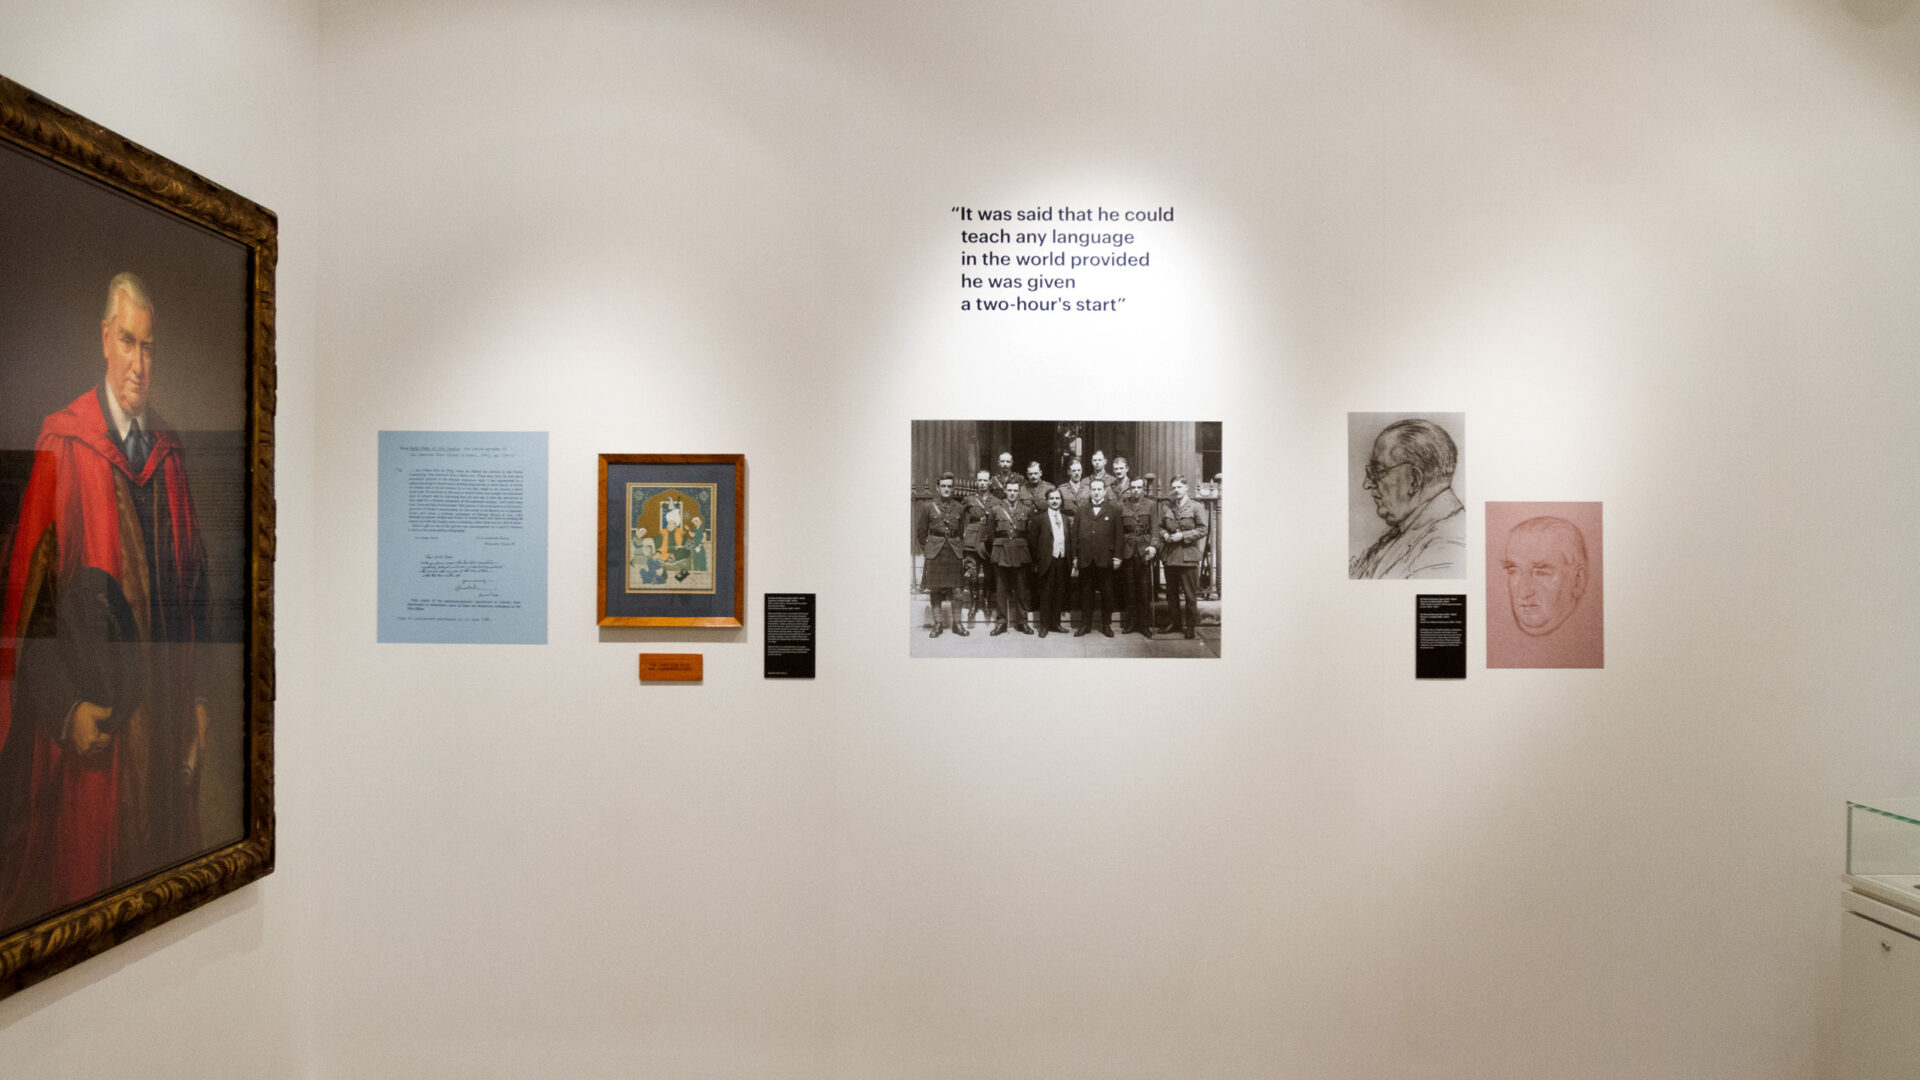 100 years of SOAS University, London exhibition at the Brunei Gallery